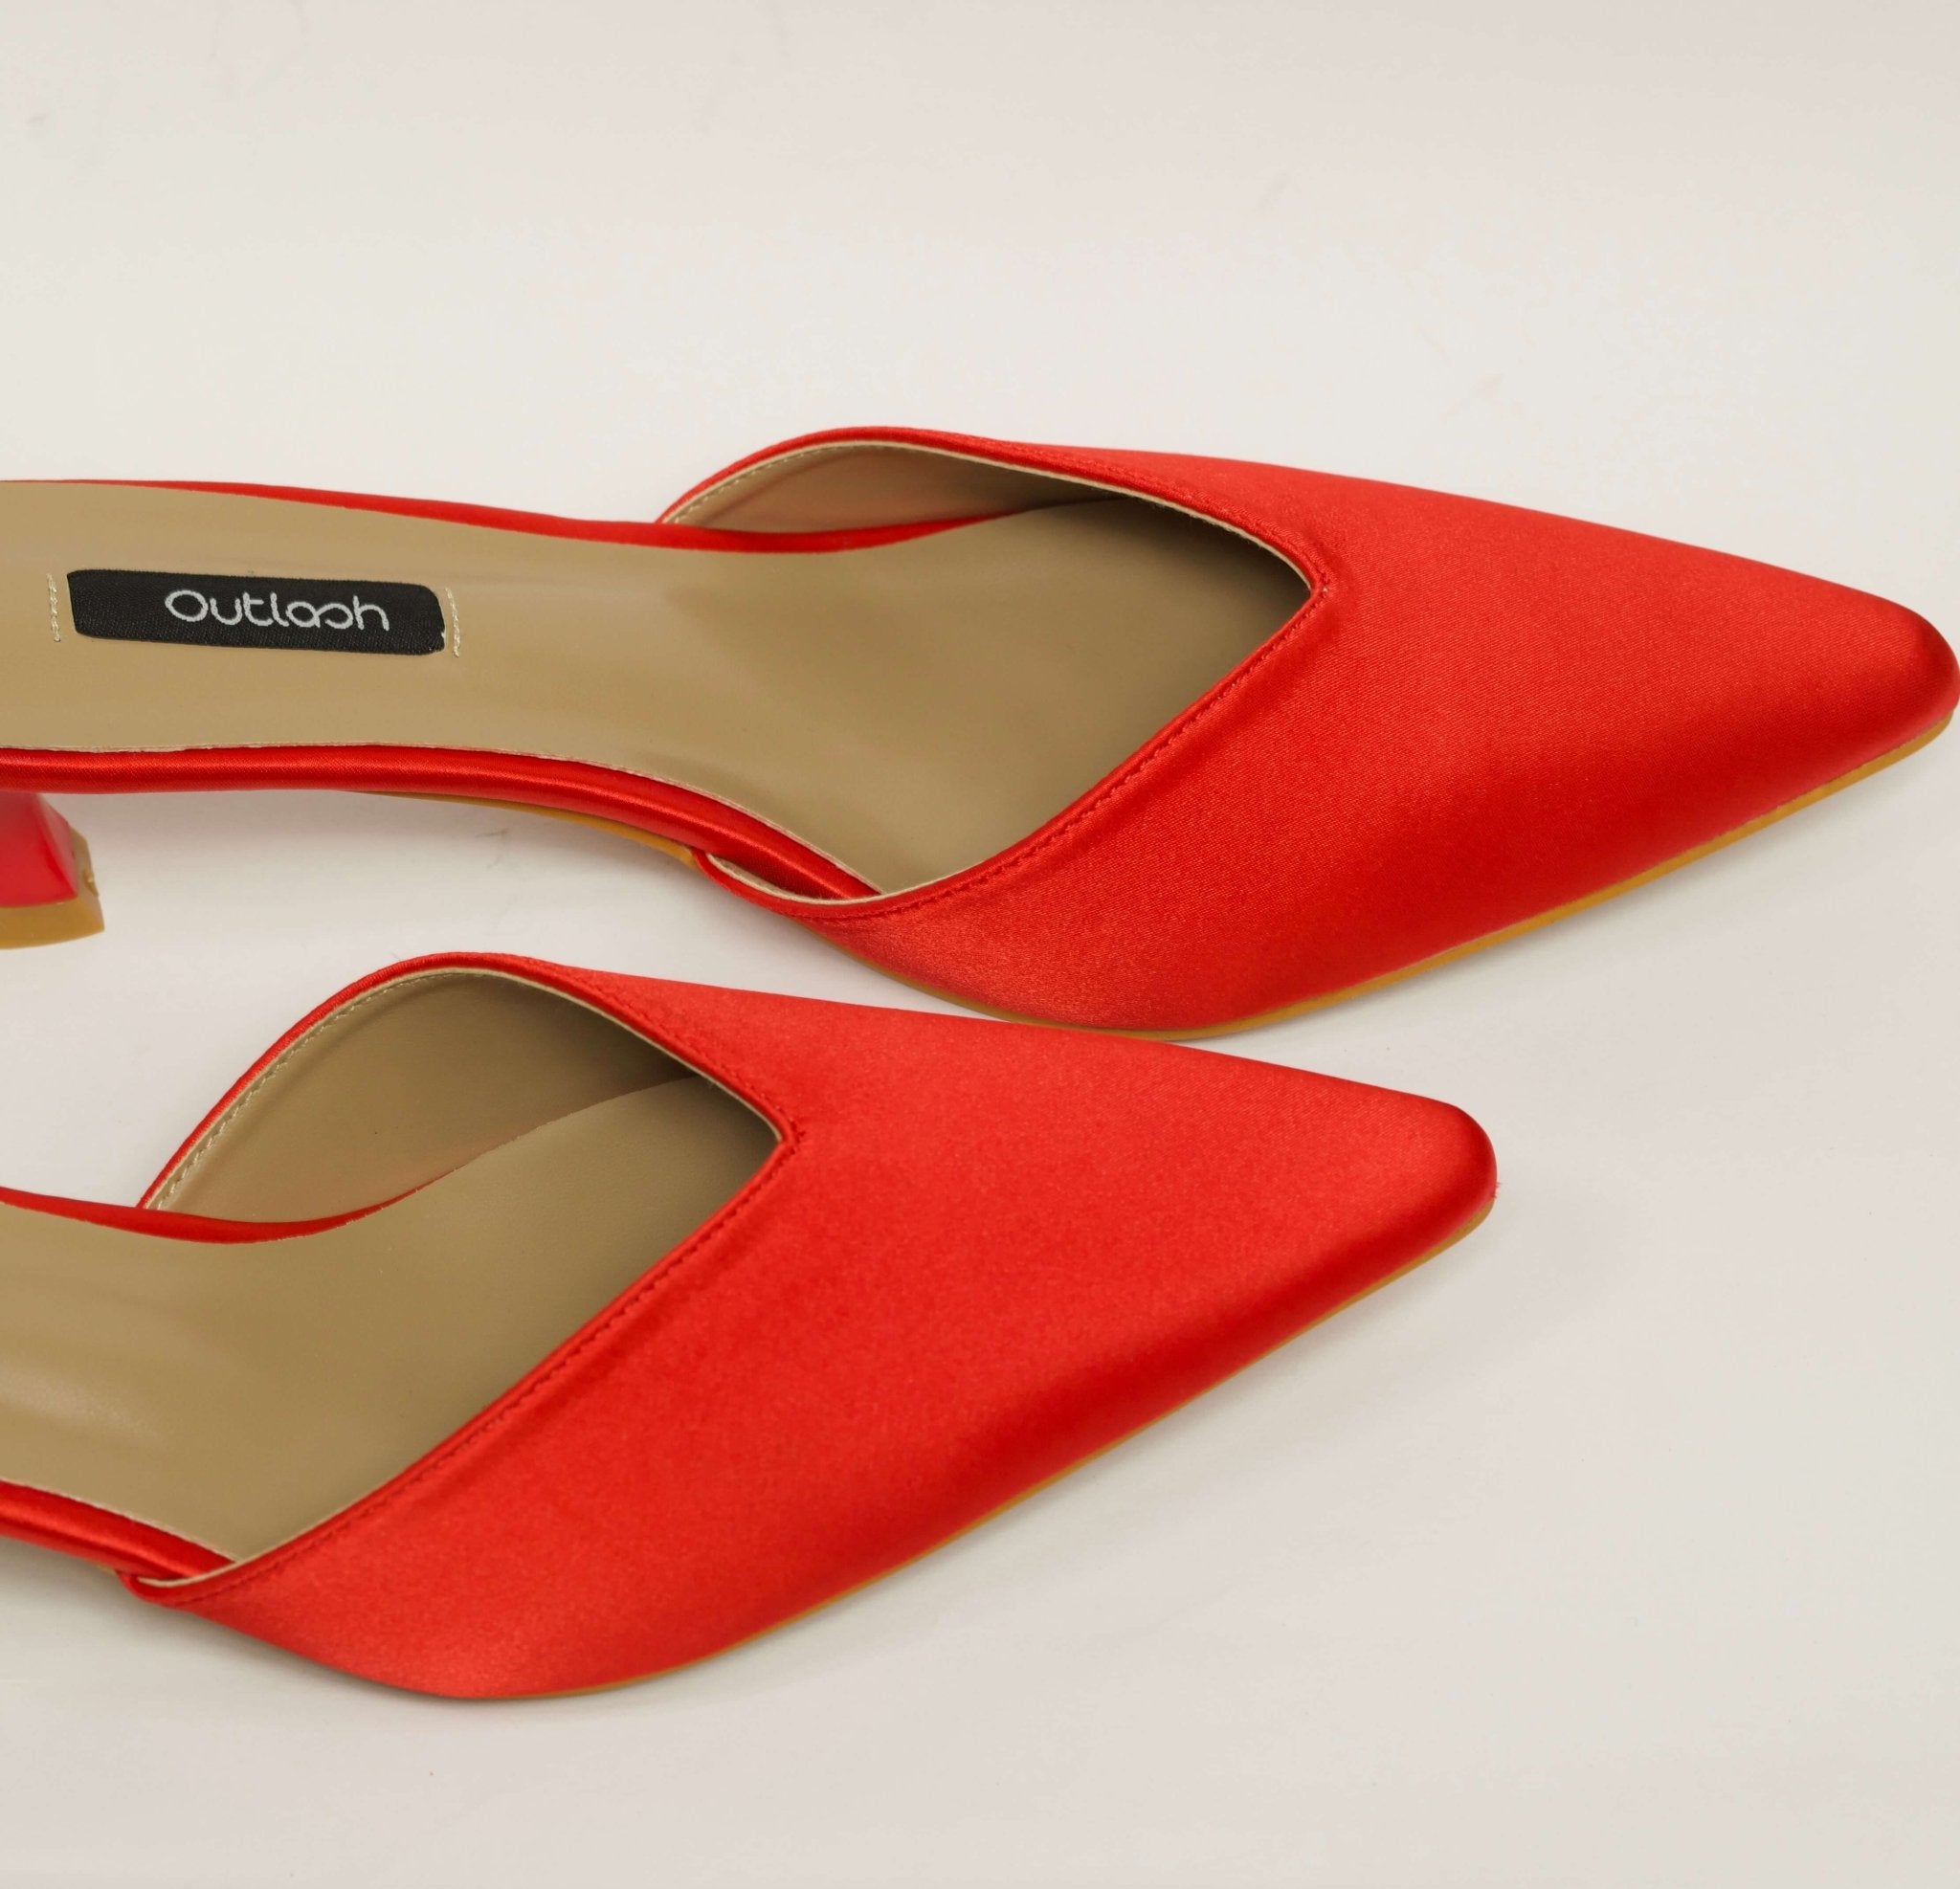 RUBY MULE IN RED - Outlash brand